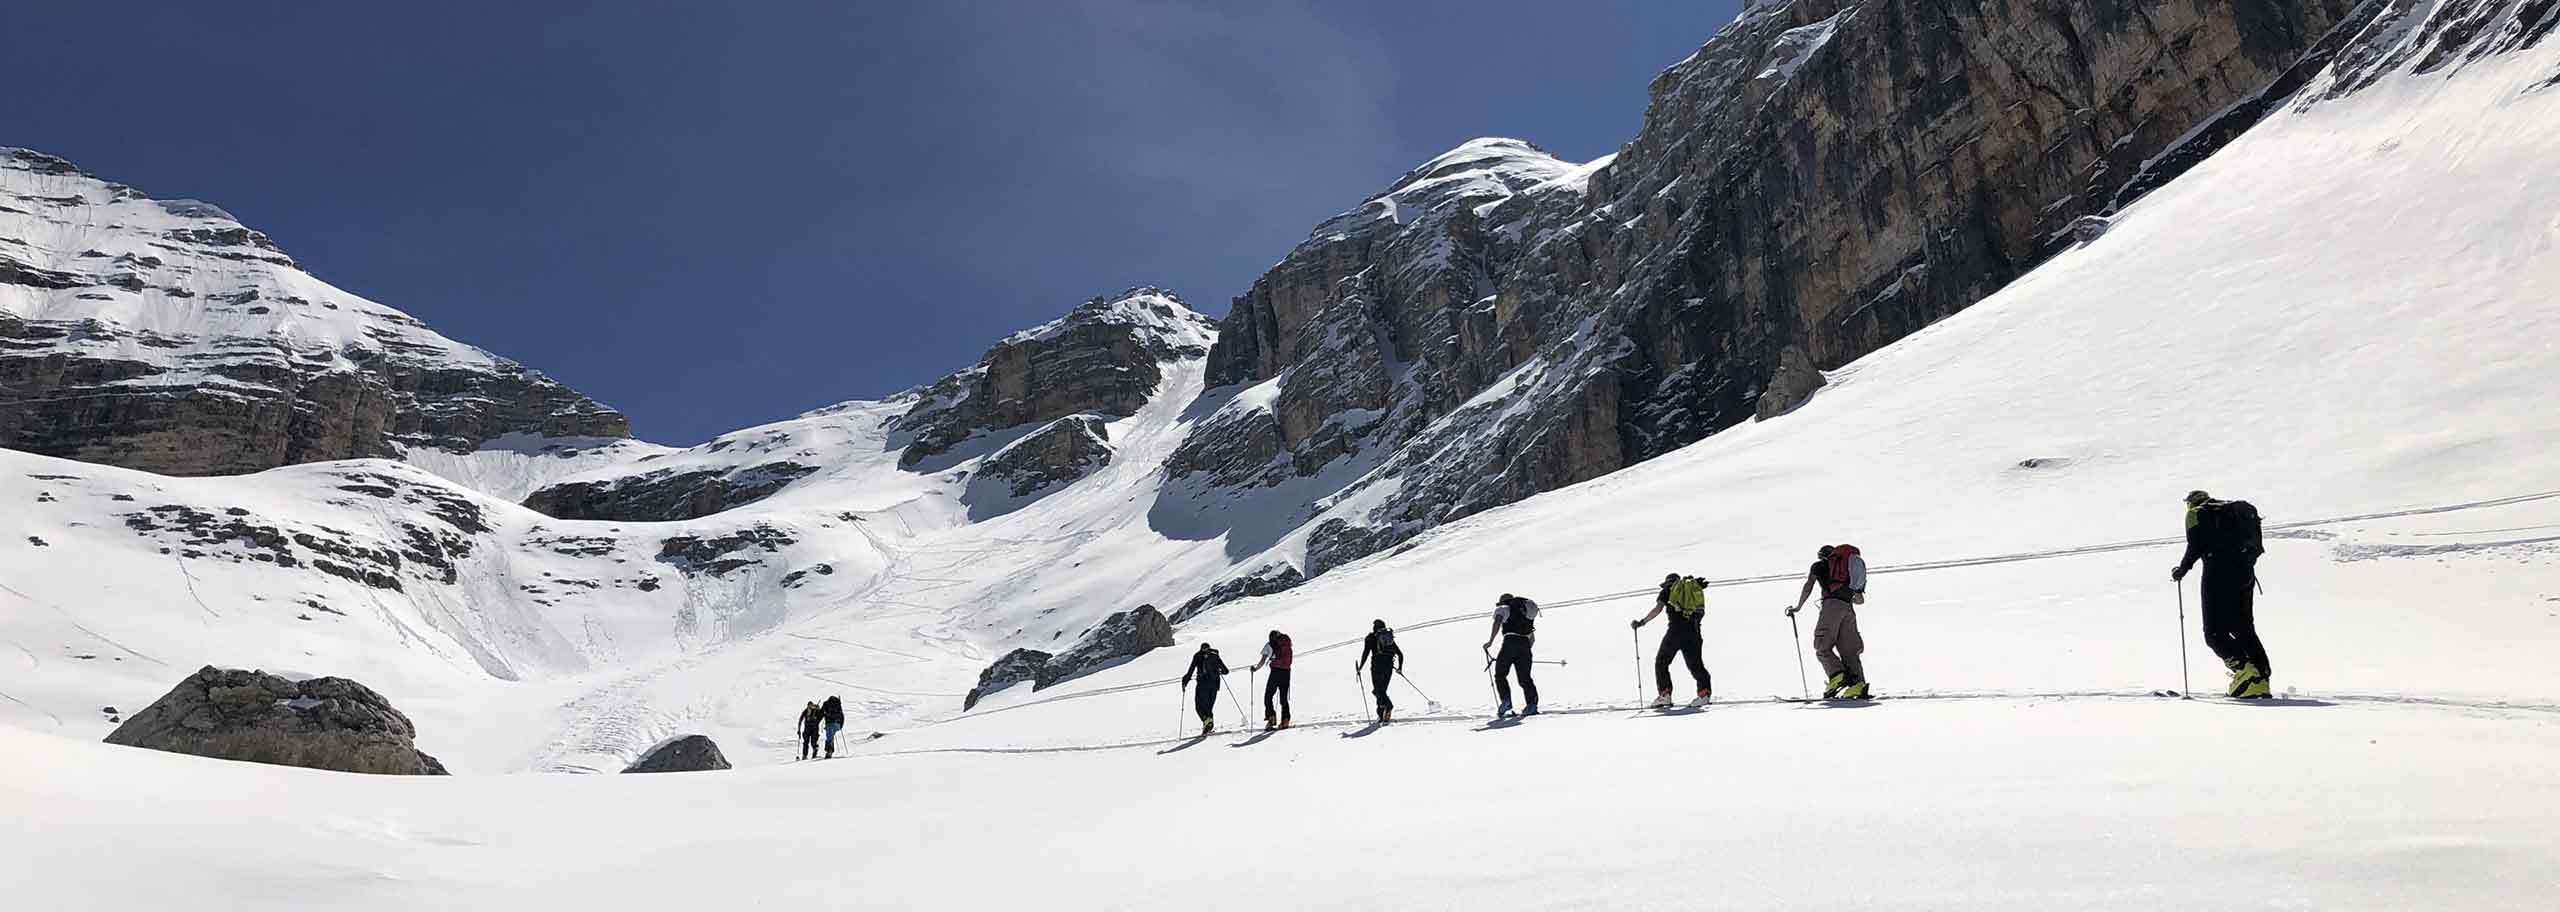 Val di Fassa Ski Touring Experiences, Day Trips and Courses